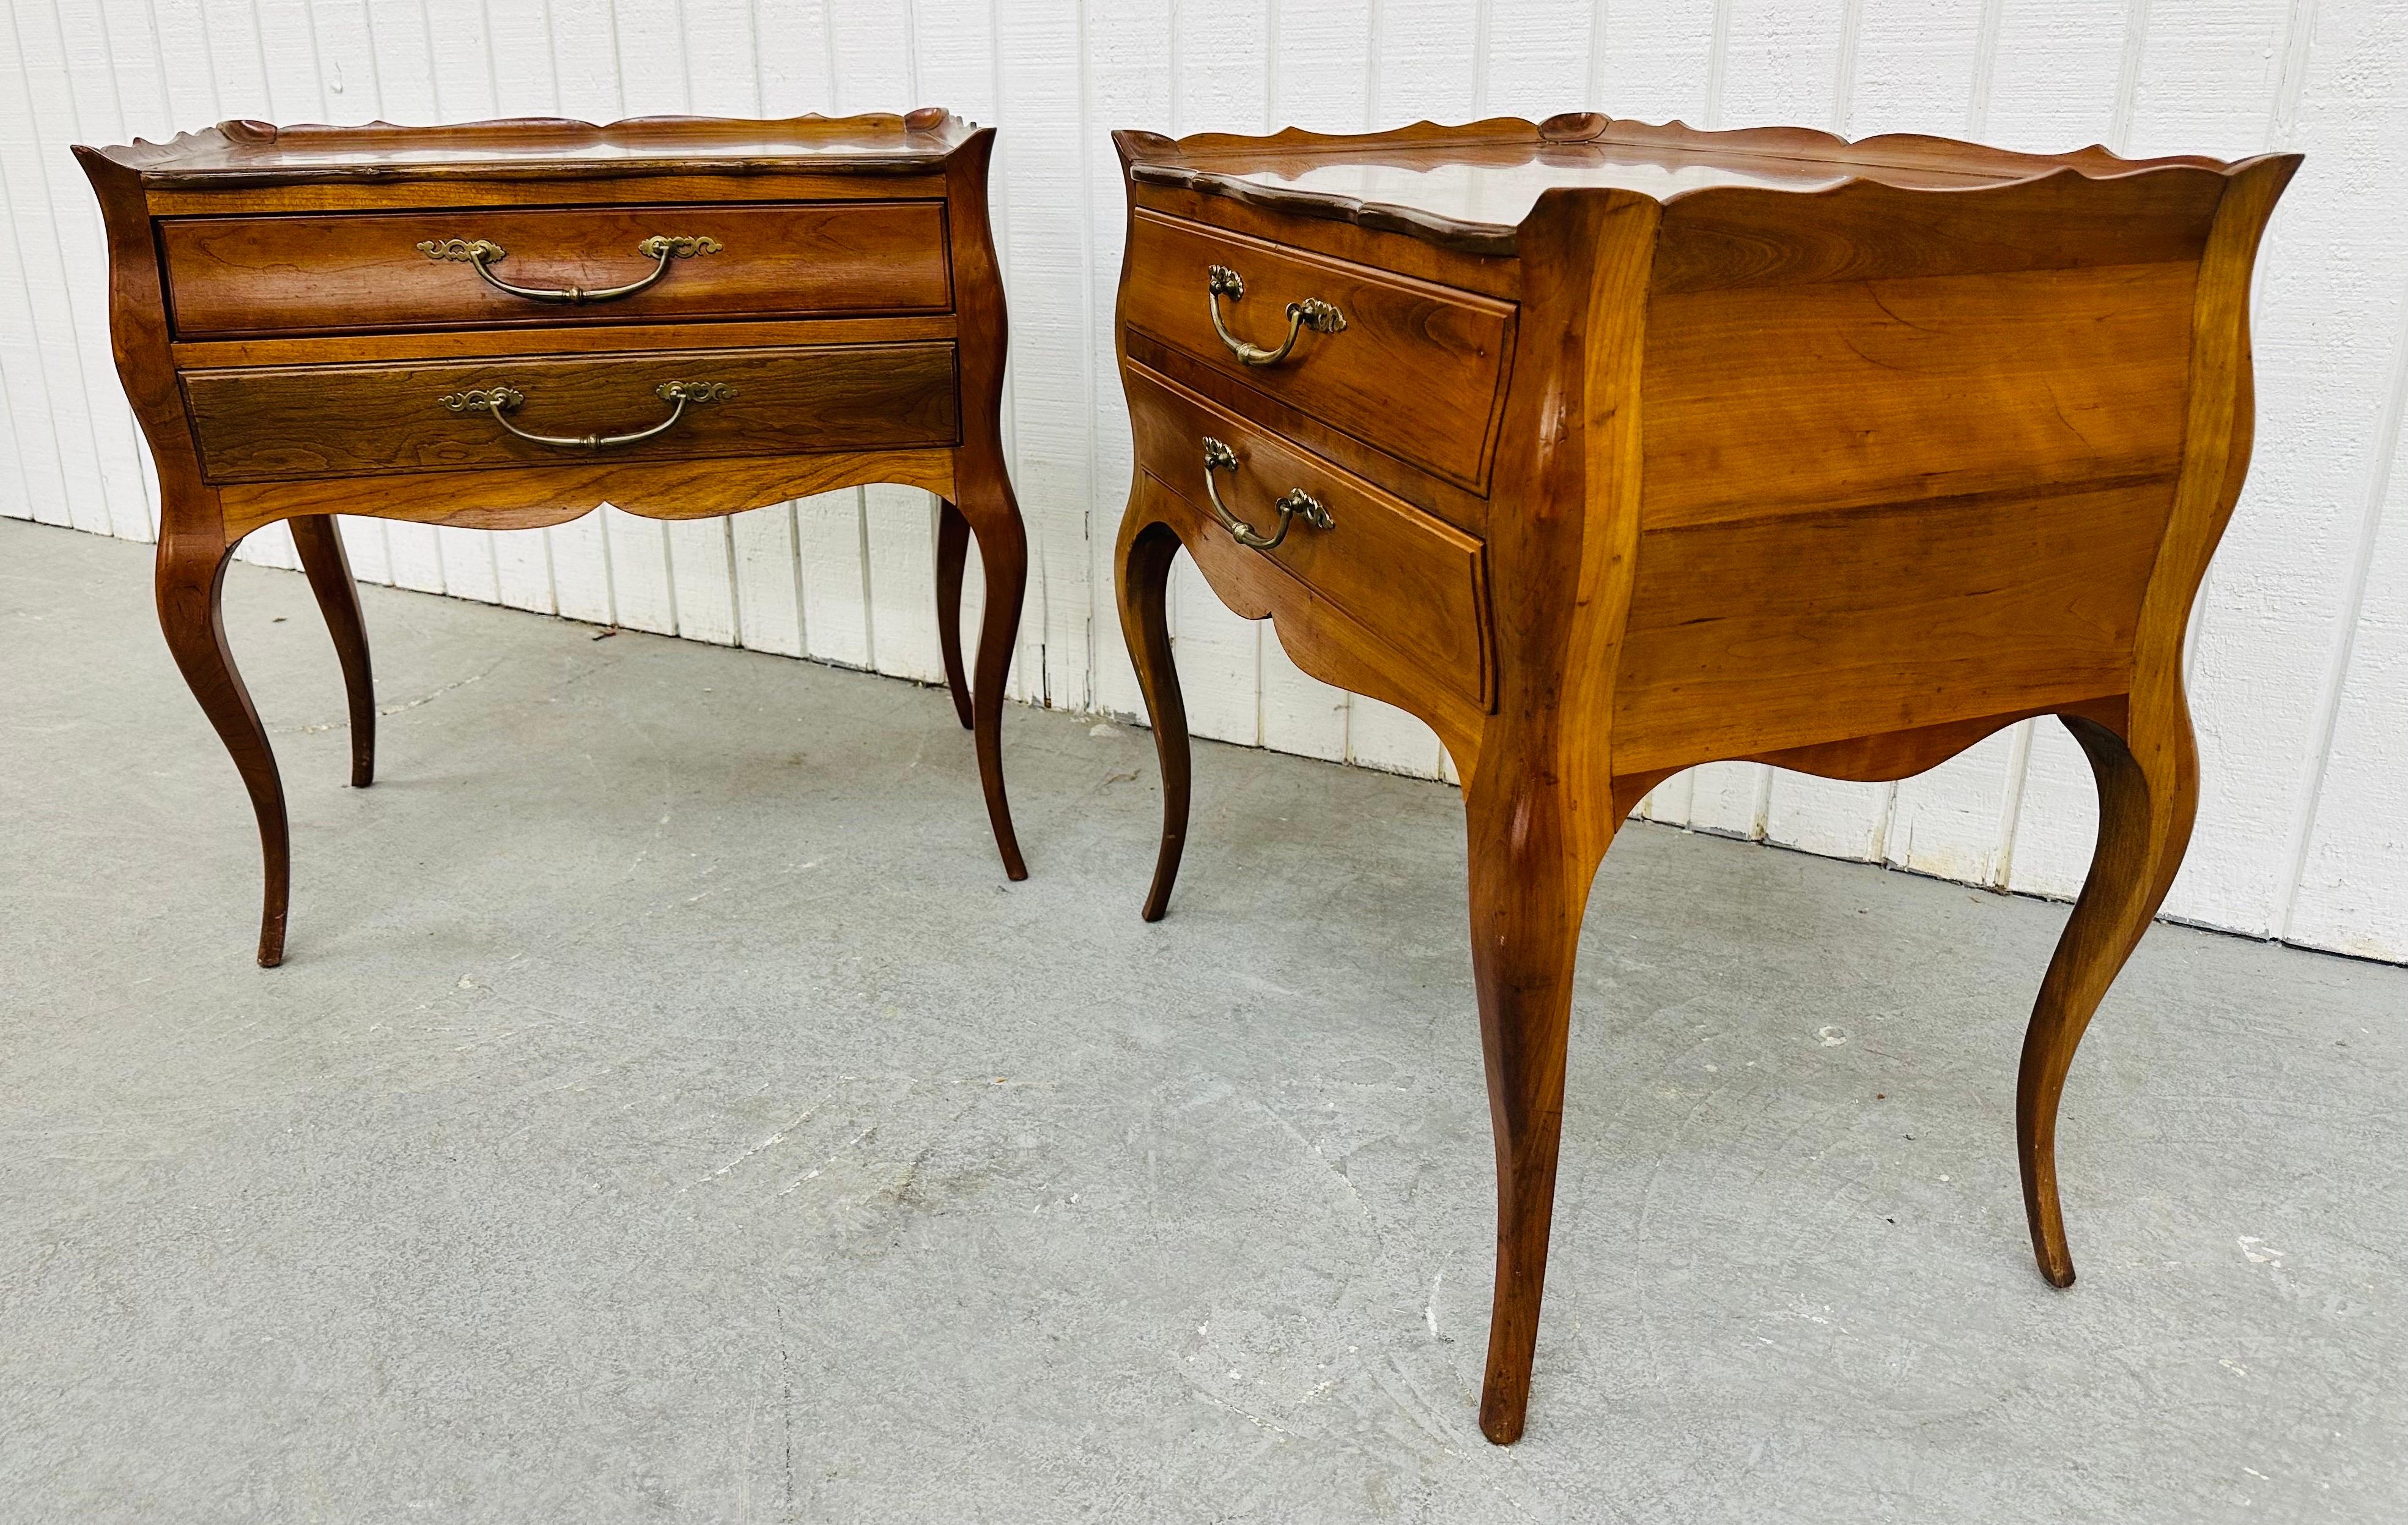 This listing is for a pair of vintage French Style Cherry Wood Nightstands. Featuring a French style design, two drawers for storage, original brass pulls, and a beautiful cherry finish. This is an exceptional combination of quality and design!